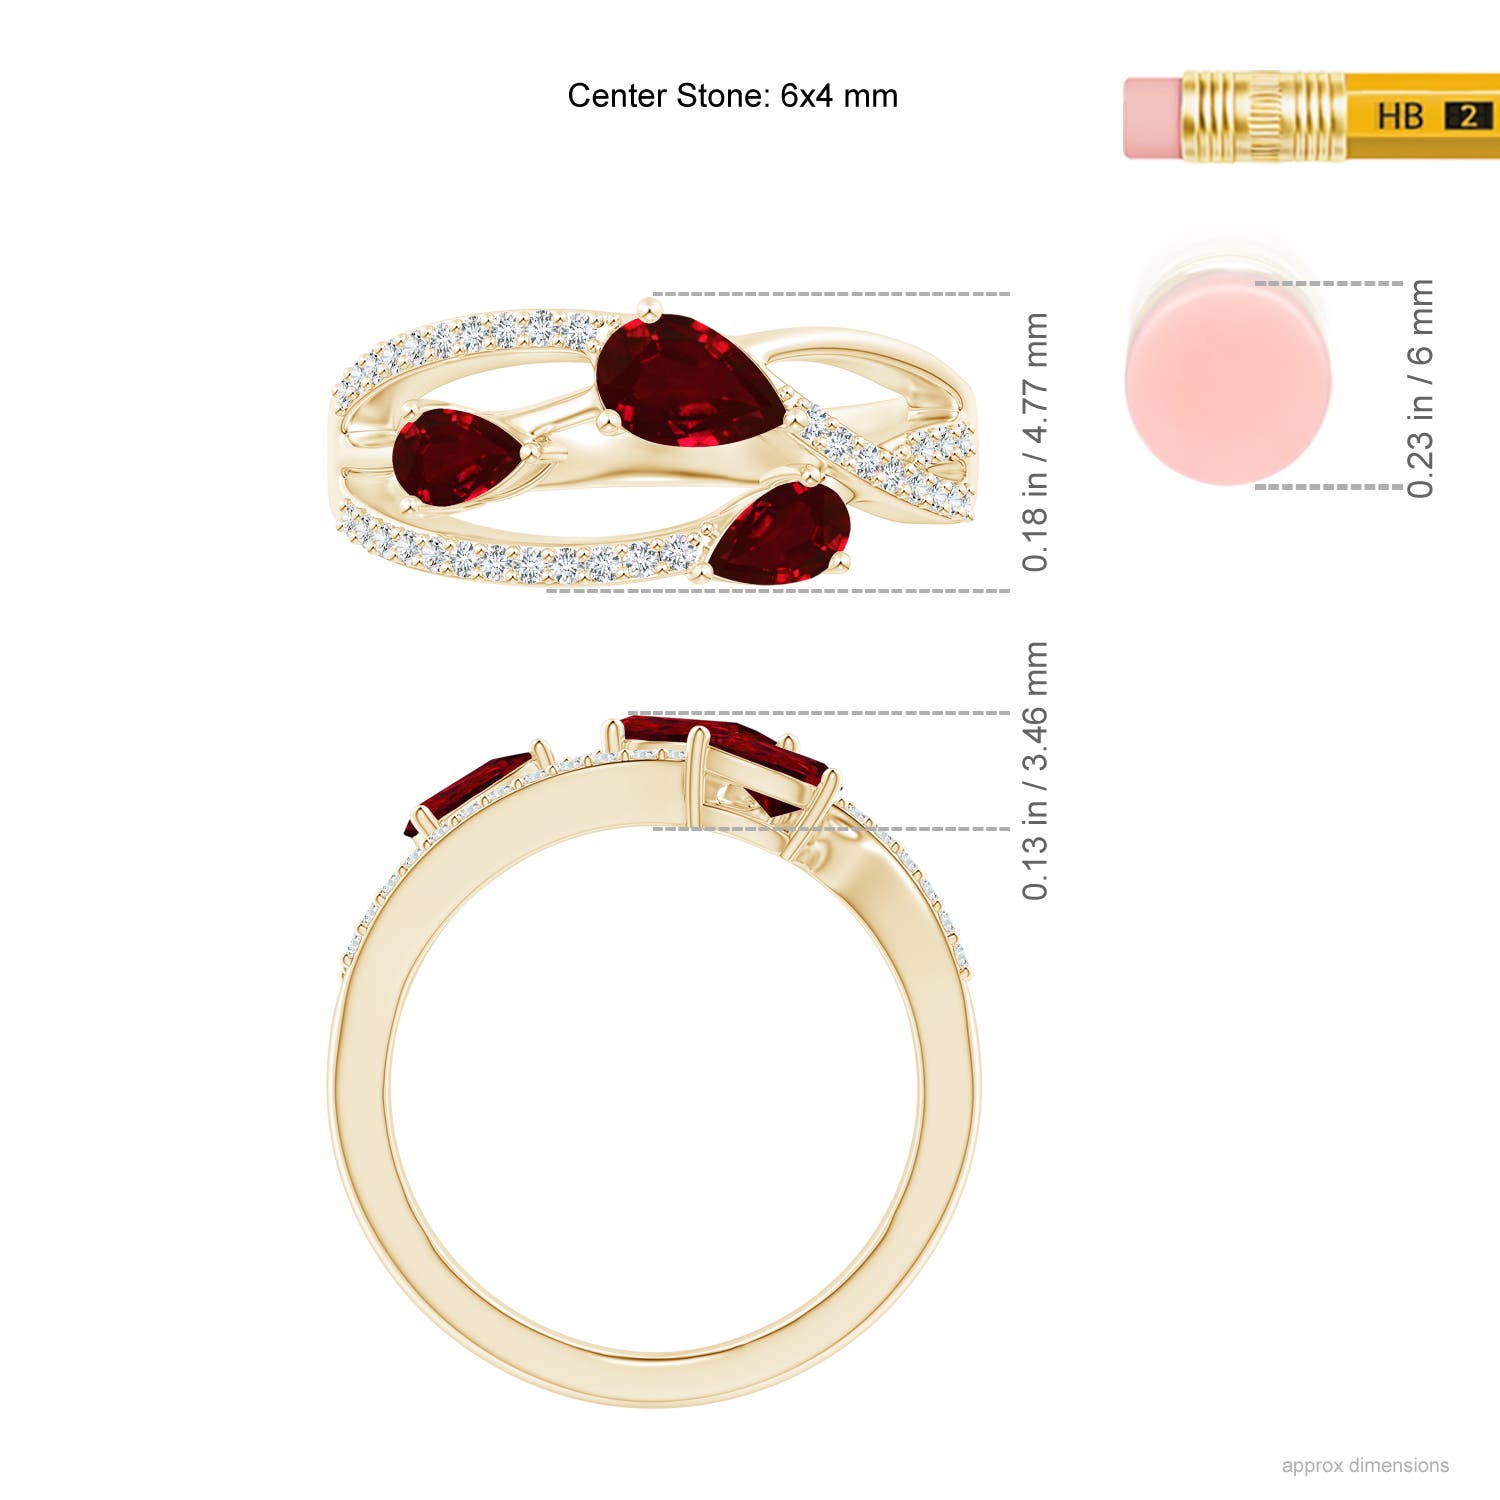 AAAA - Ruby / 1.03 CT / 14 KT Yellow Gold